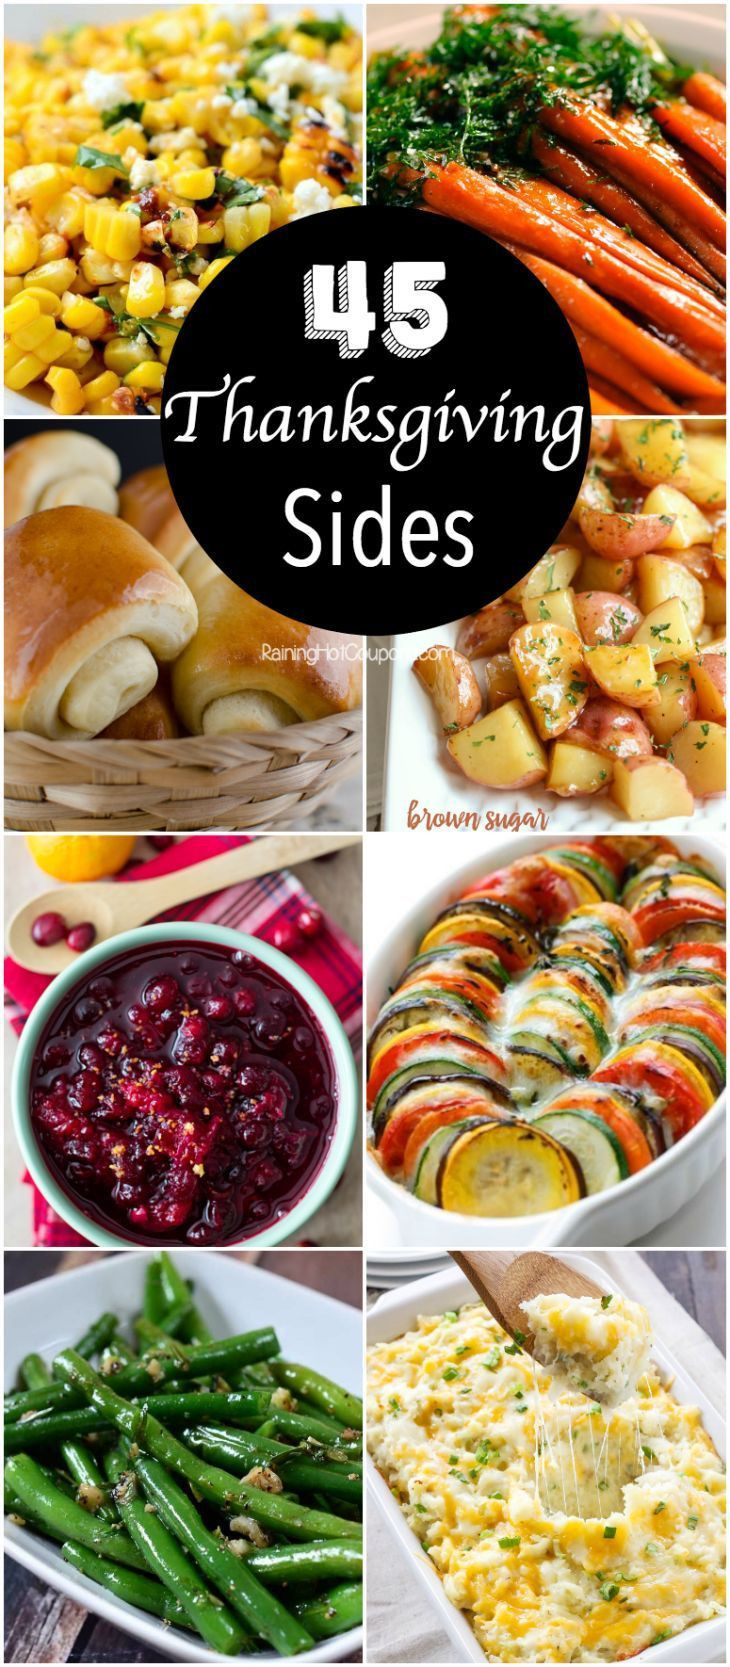 Best 30 Thanksgiving Potluck Side Dishes – Most Popular Ideas of All Time